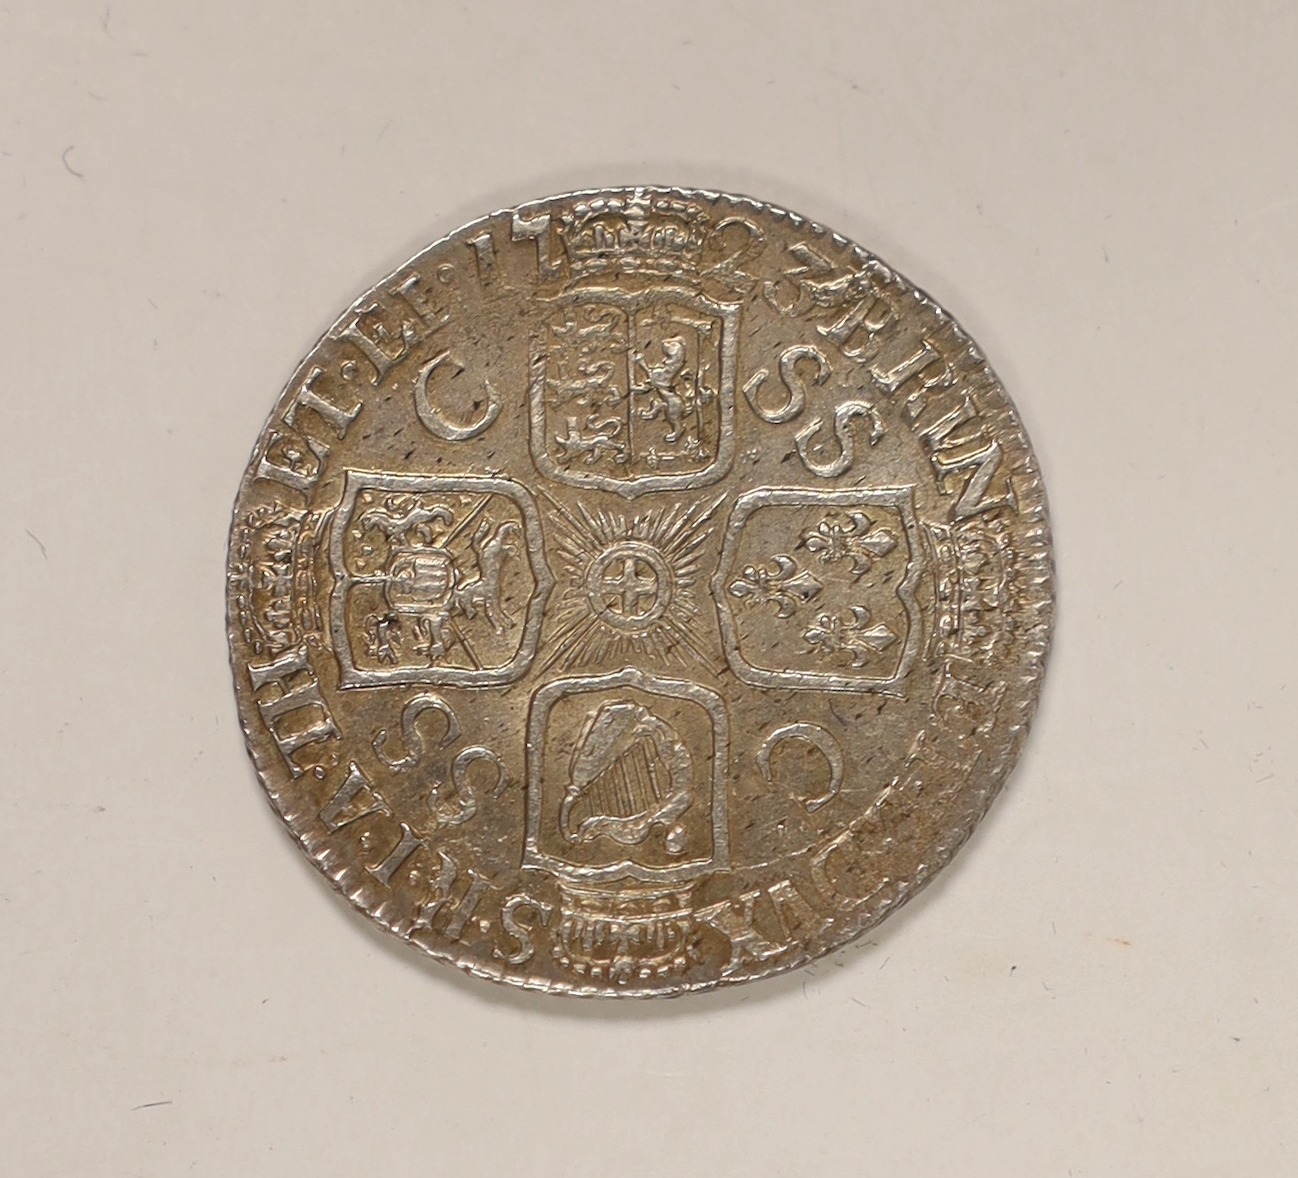 British silver coins, George I shilling SSC 1723, good VF